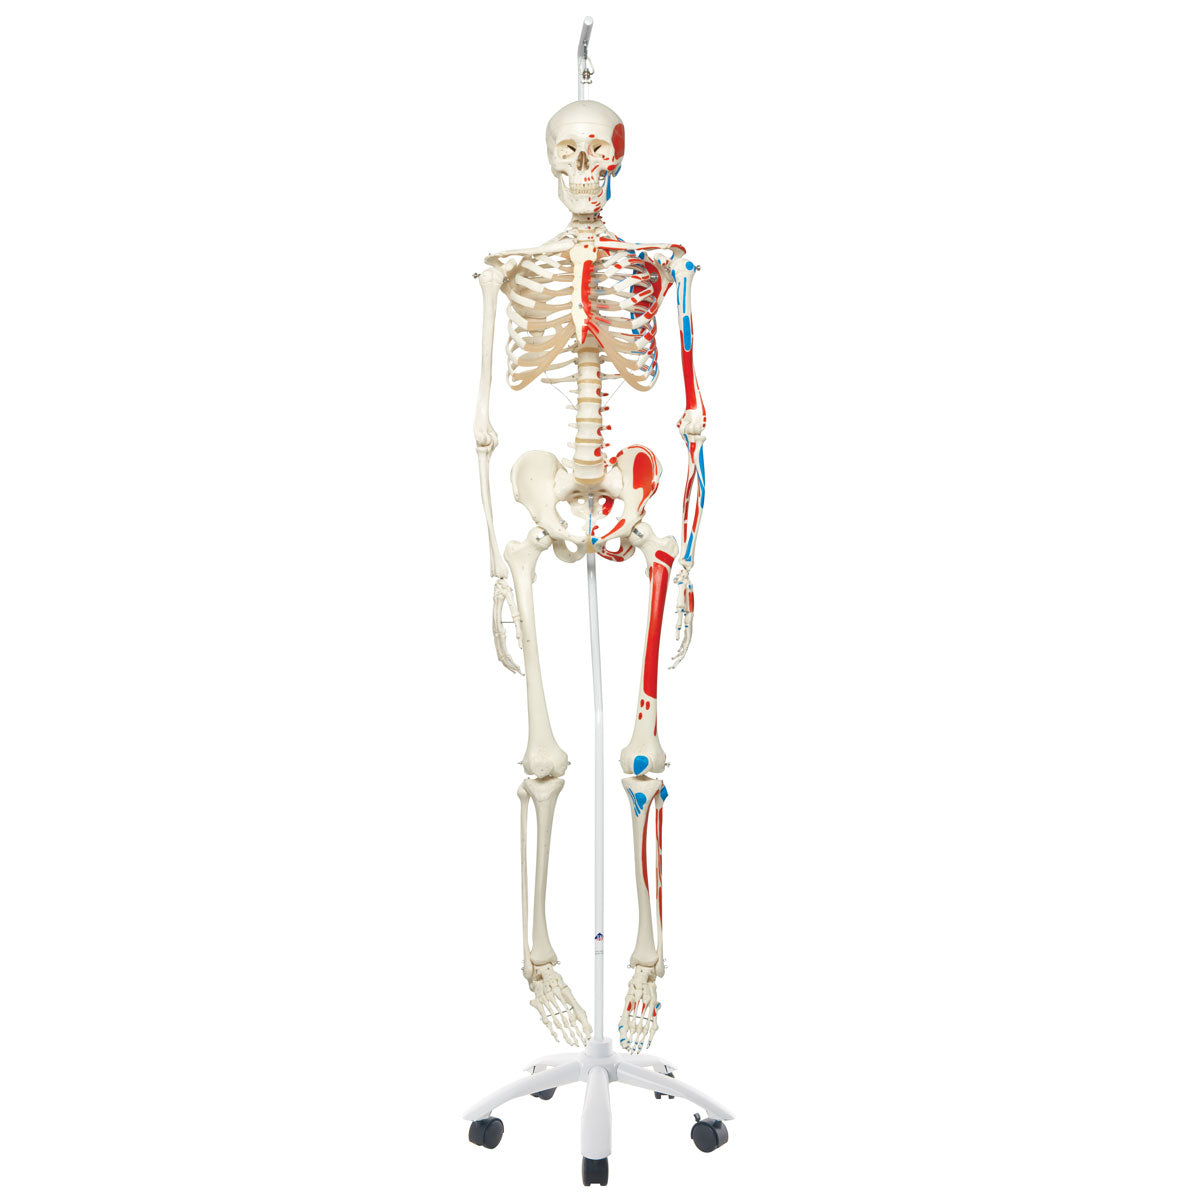 A11/1 Human Skeleton Model Max on Hanging Stand with Painted Muscle Origins & Inserts - 3B Smart Anatomy